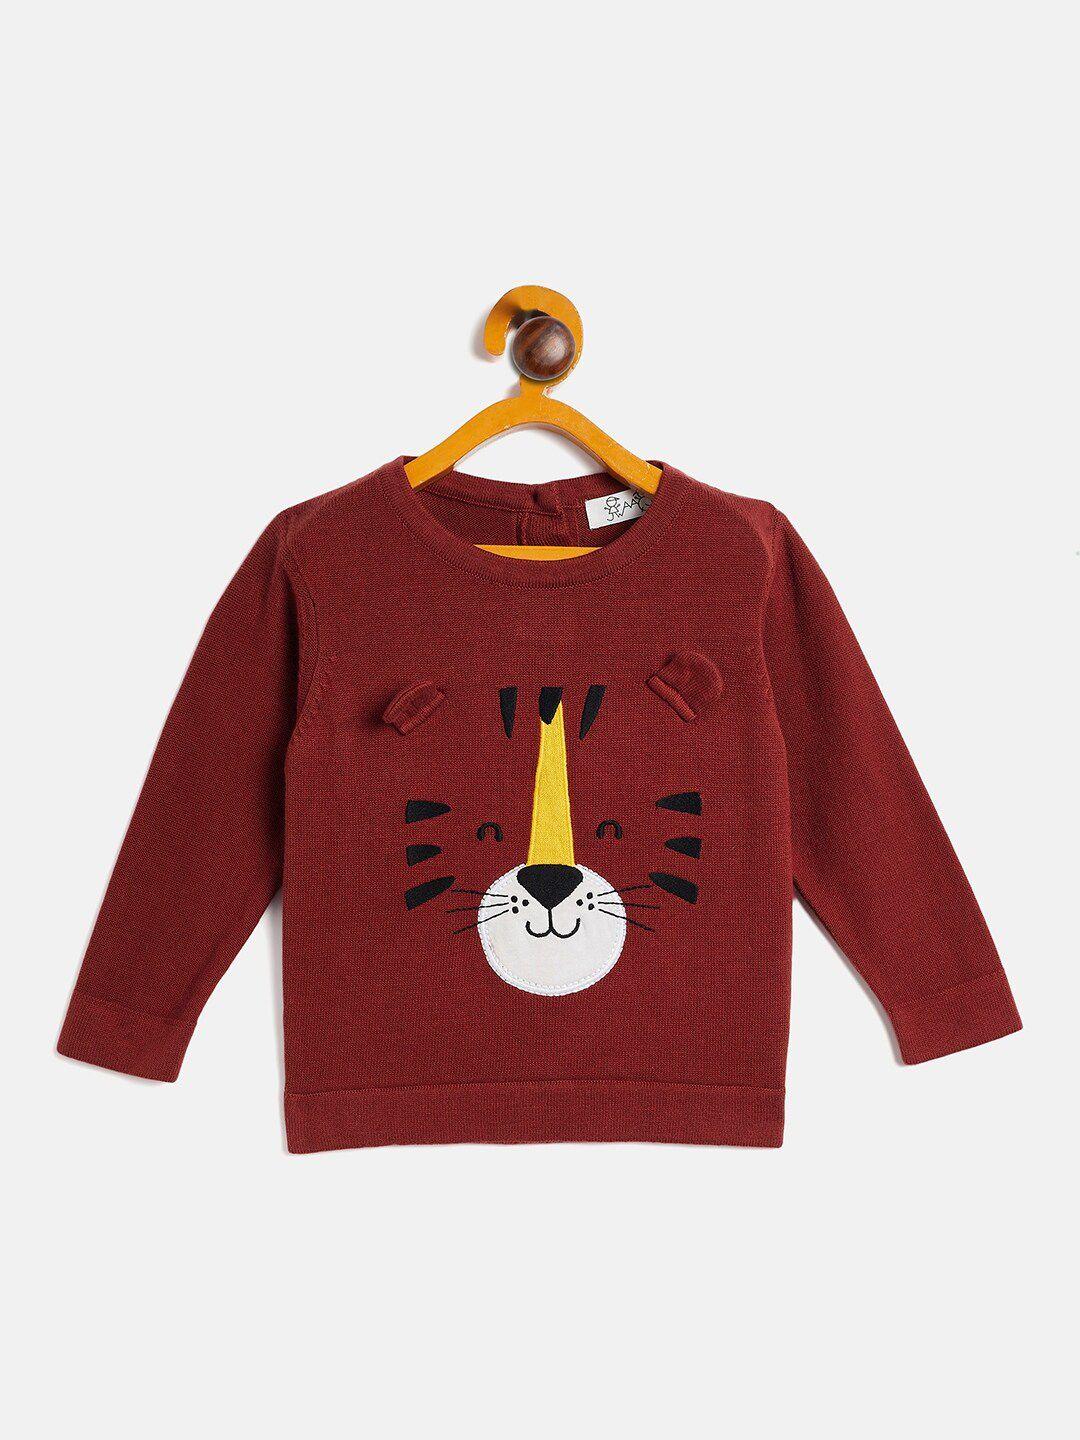 jwaaq-unisex-kids-quirky-printed-embroiderd-pure-cotton-pullover-sweater